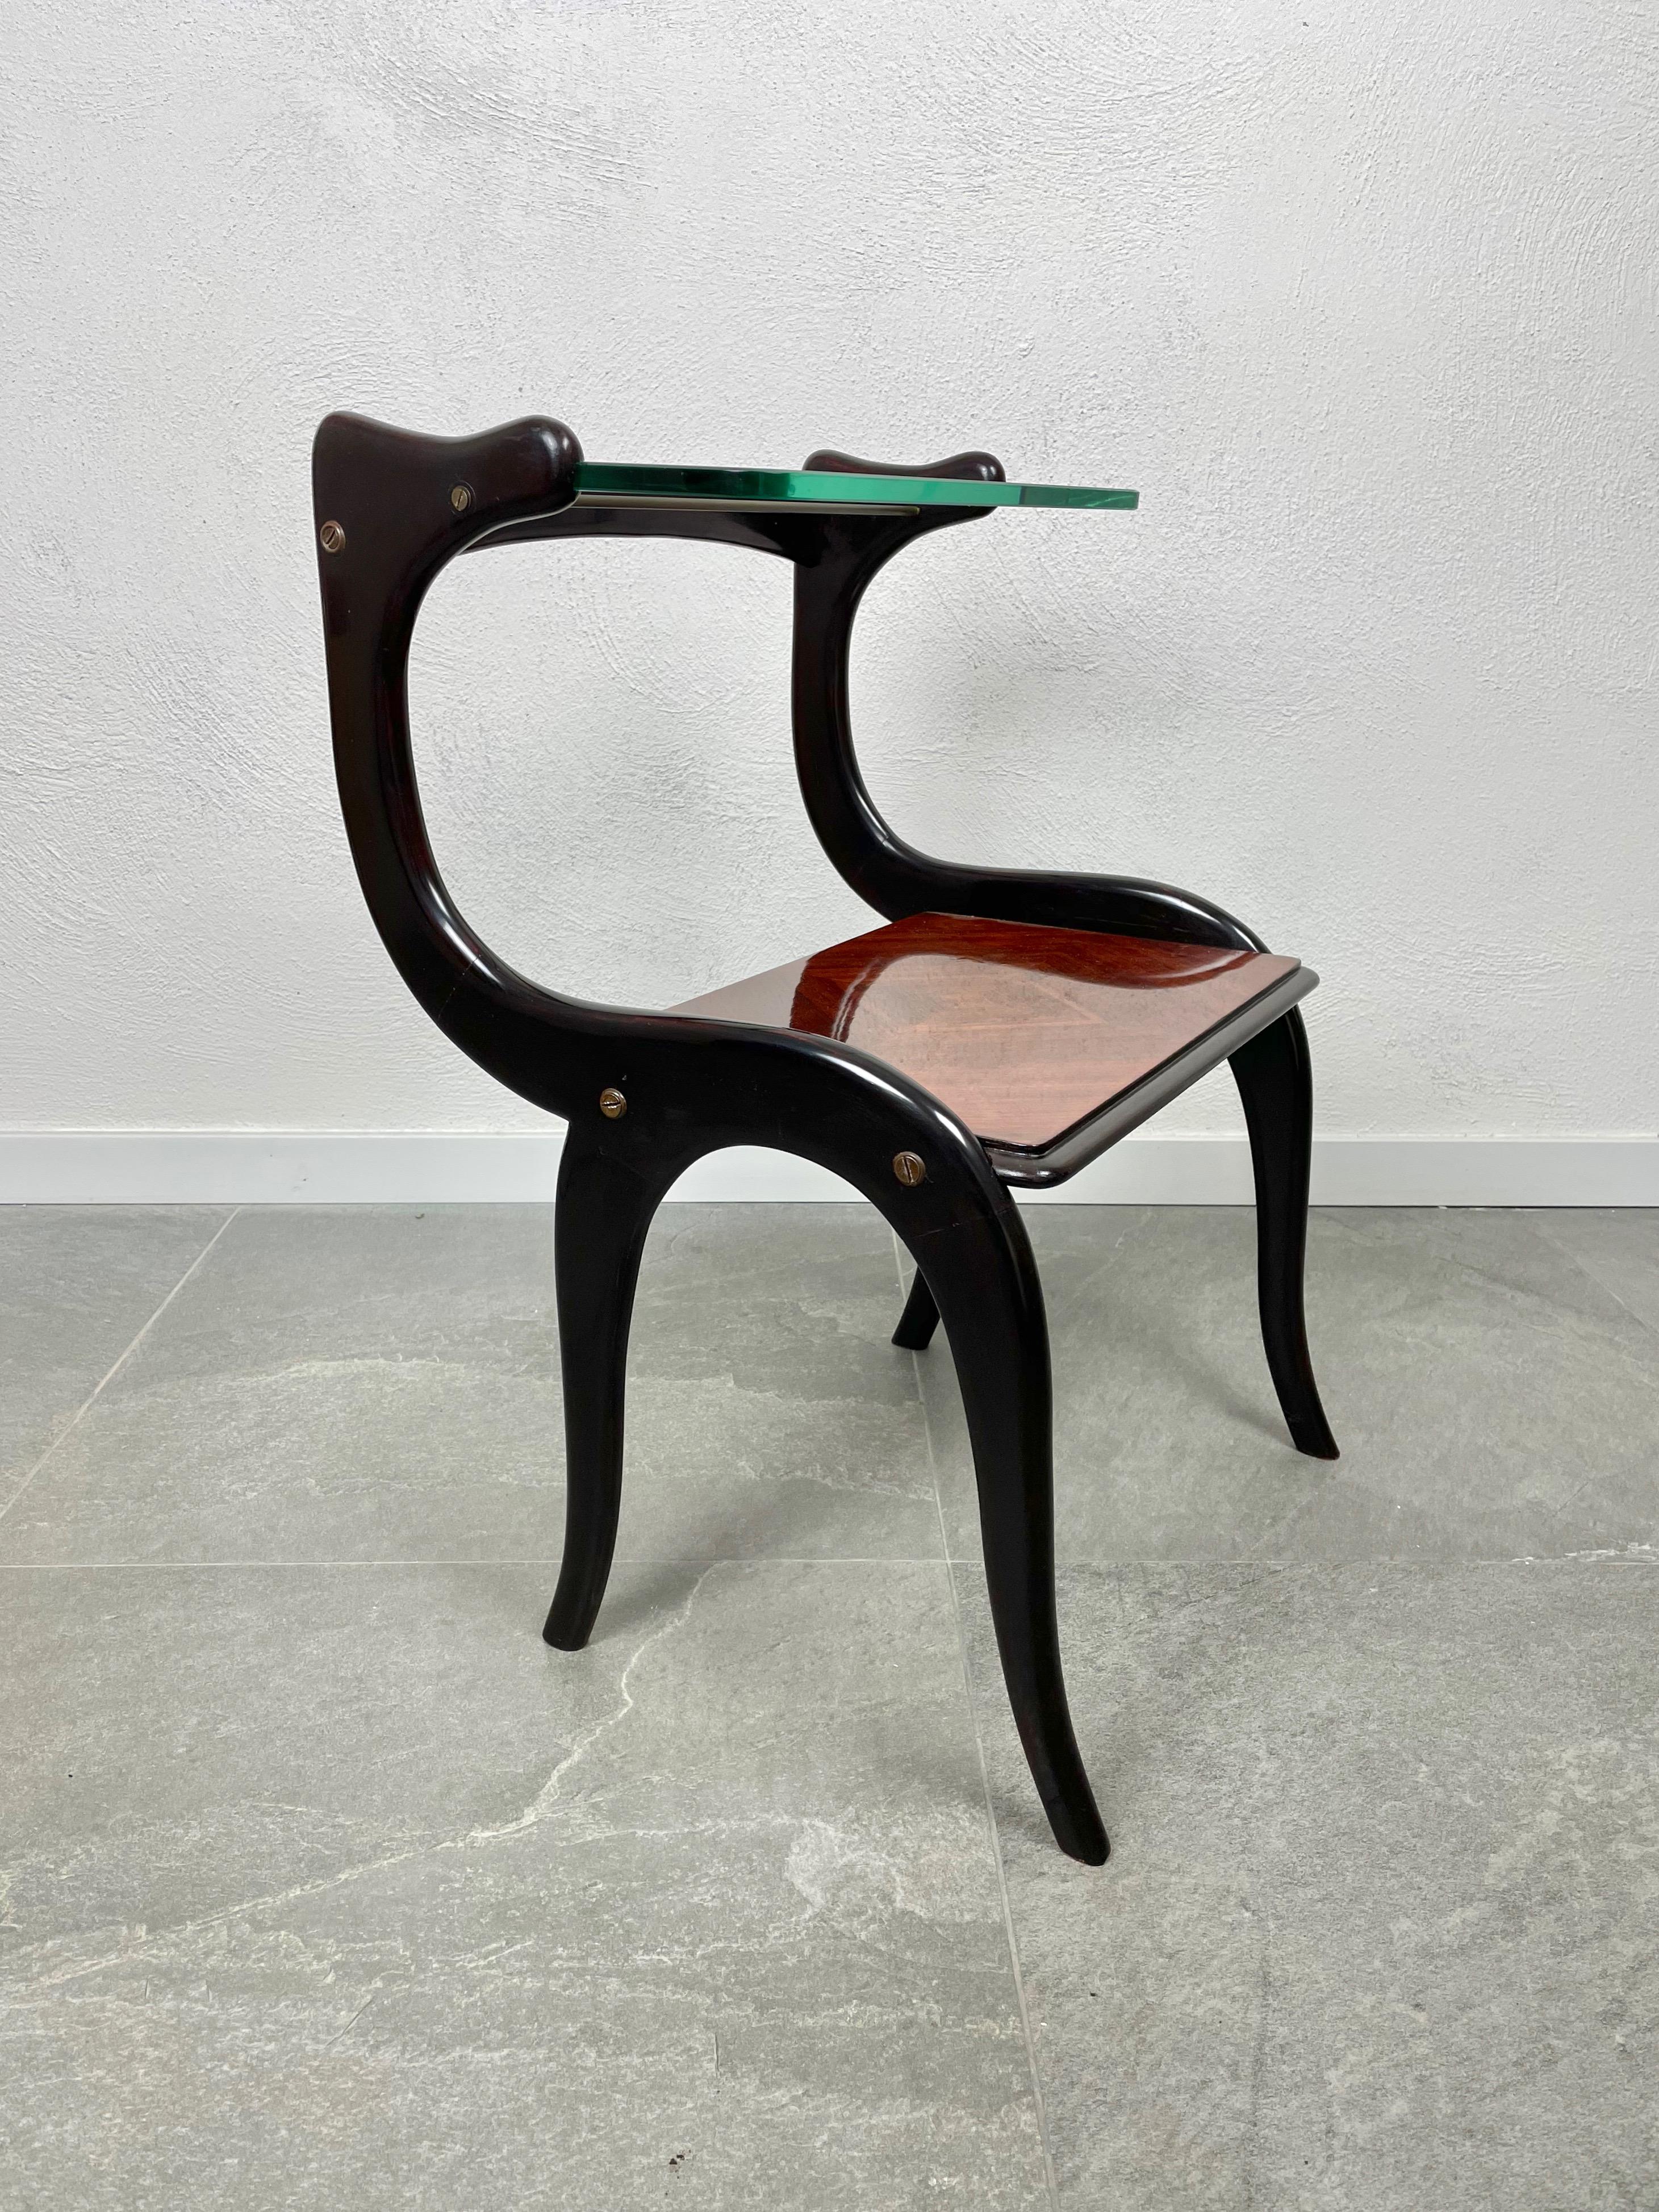 Italian Ebonized Wood and Glass Side Table Attributed to Ico Parisi, Italy, 1950s For Sale